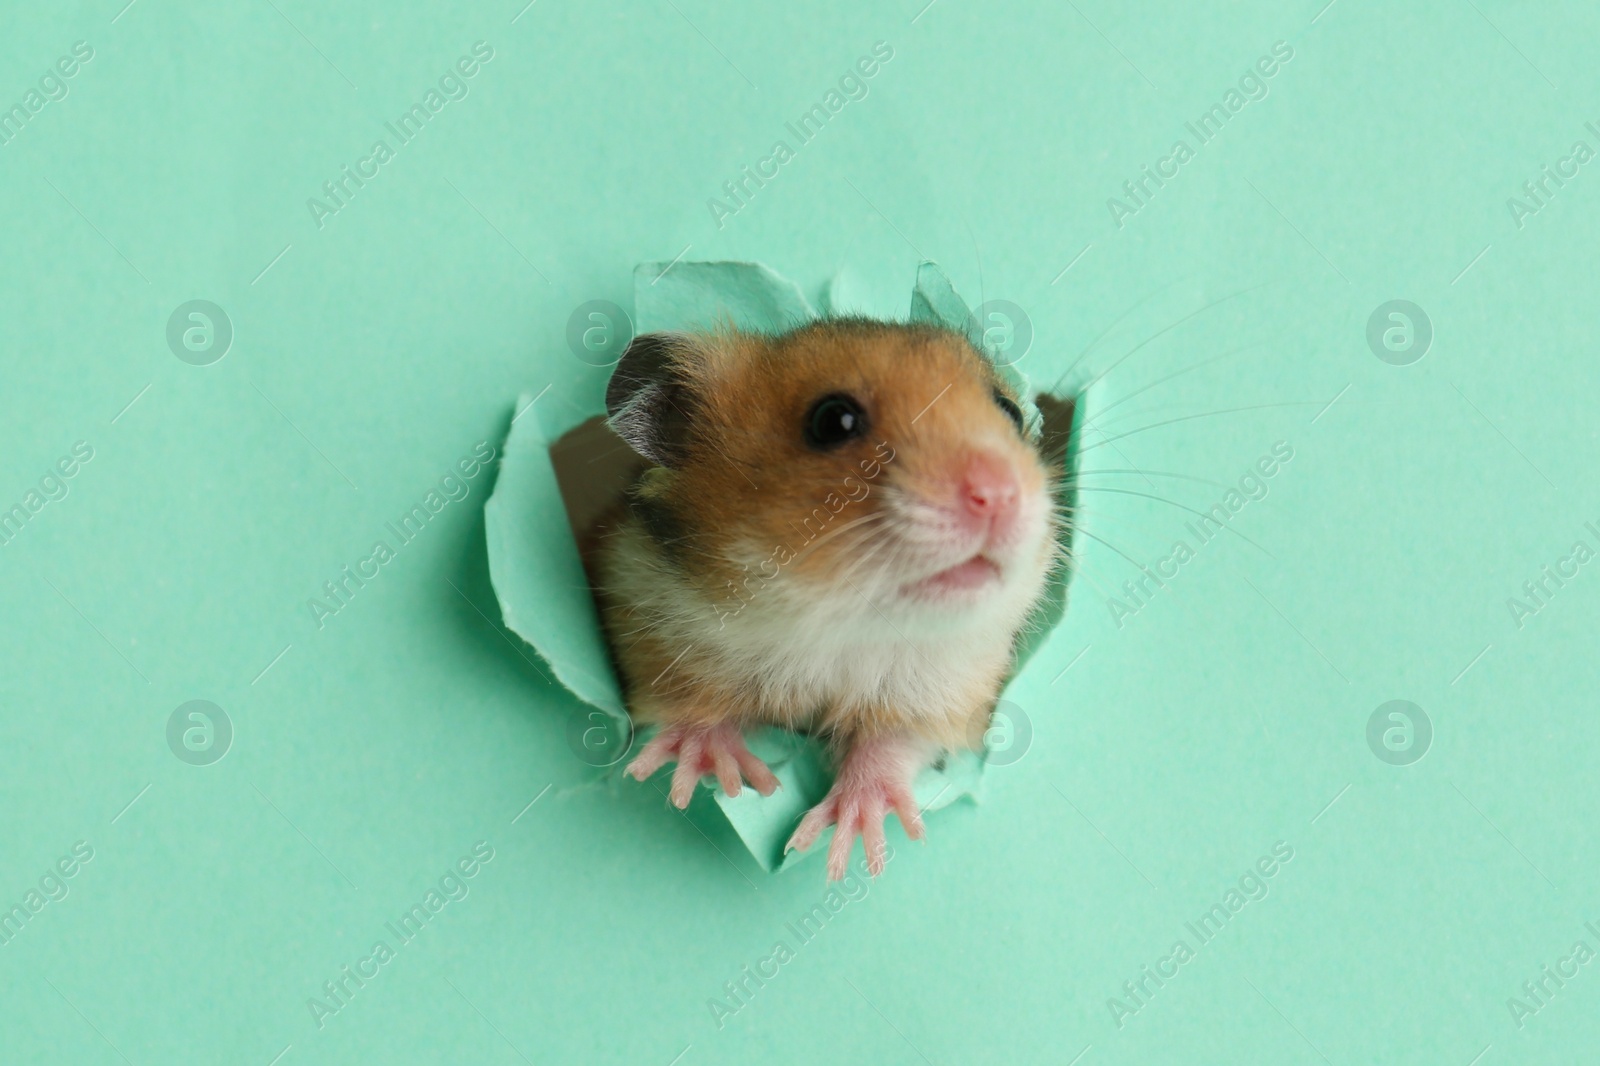 Photo of Cute little hamster looking out of hole in turquoise paper